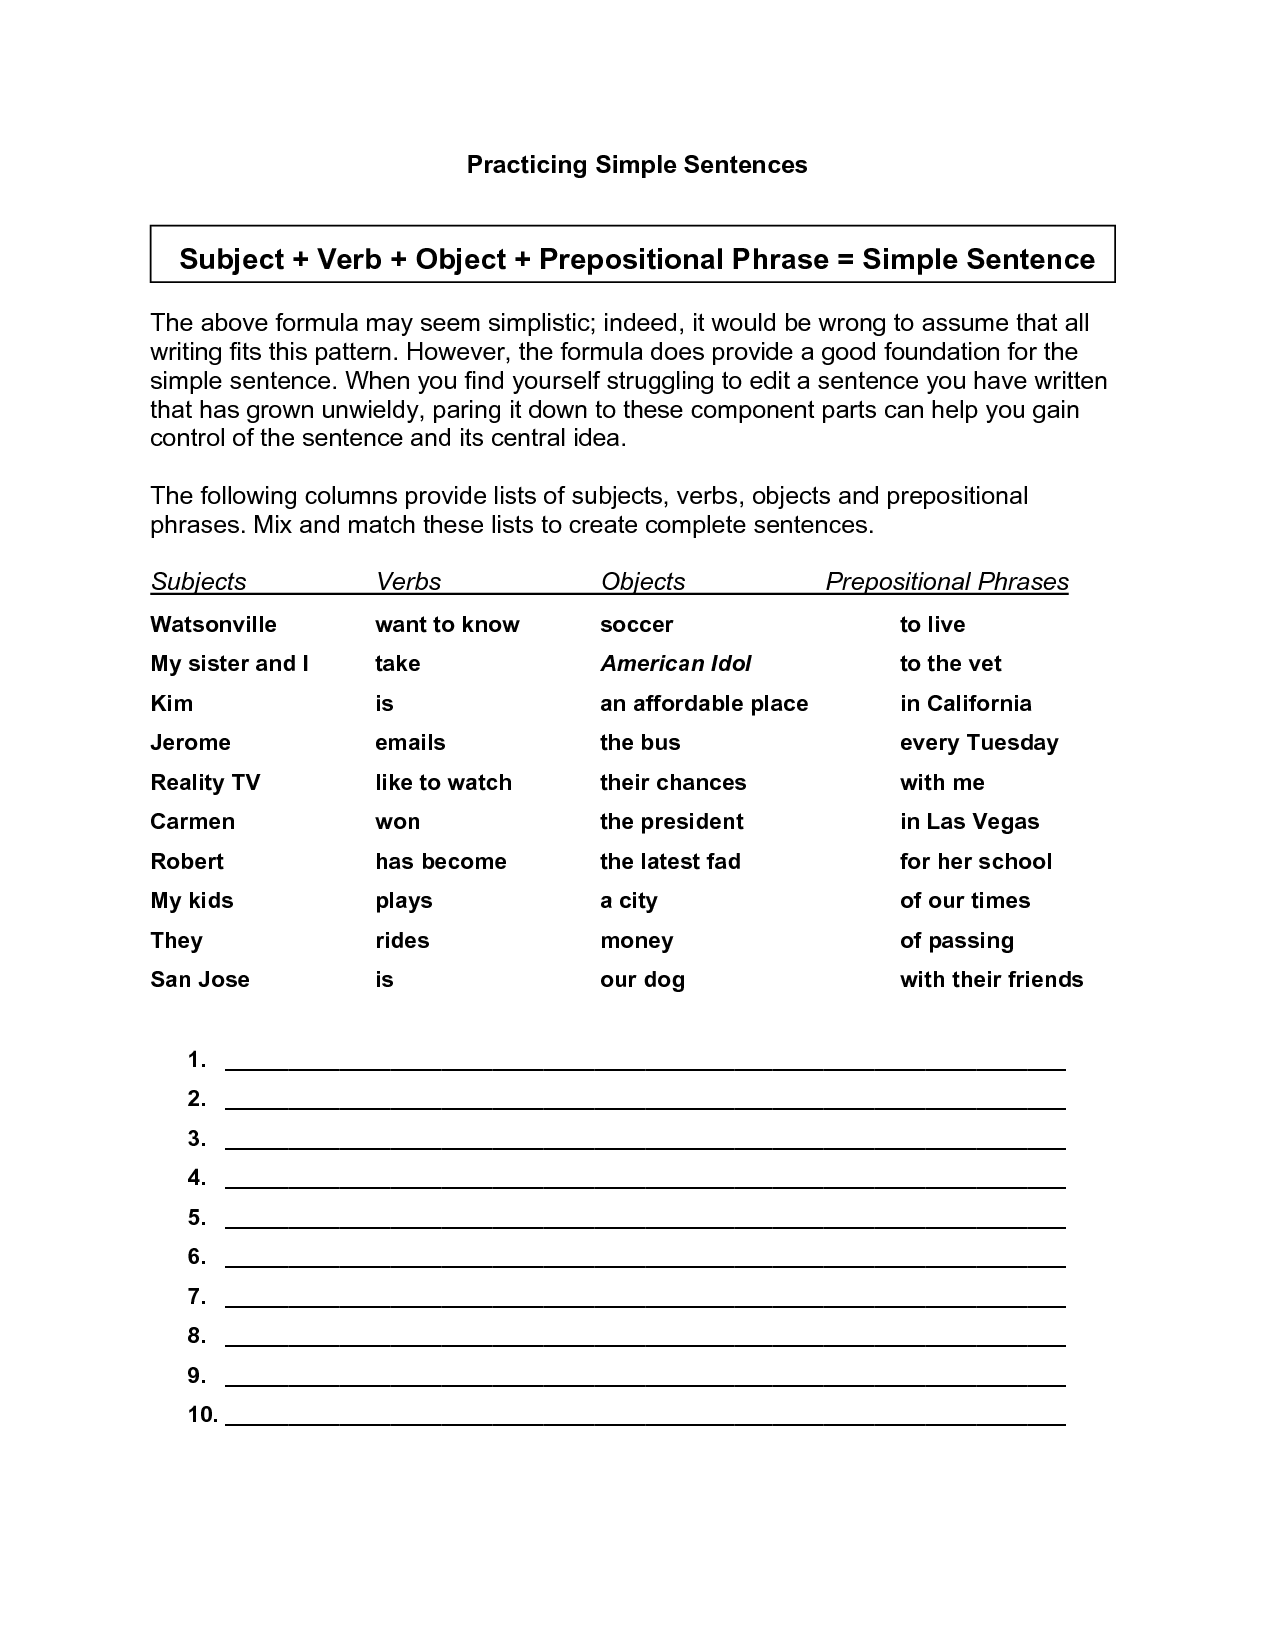 9-best-images-of-subject-word-agreement-worksheet-subject-verb-agreement-worksheets-high